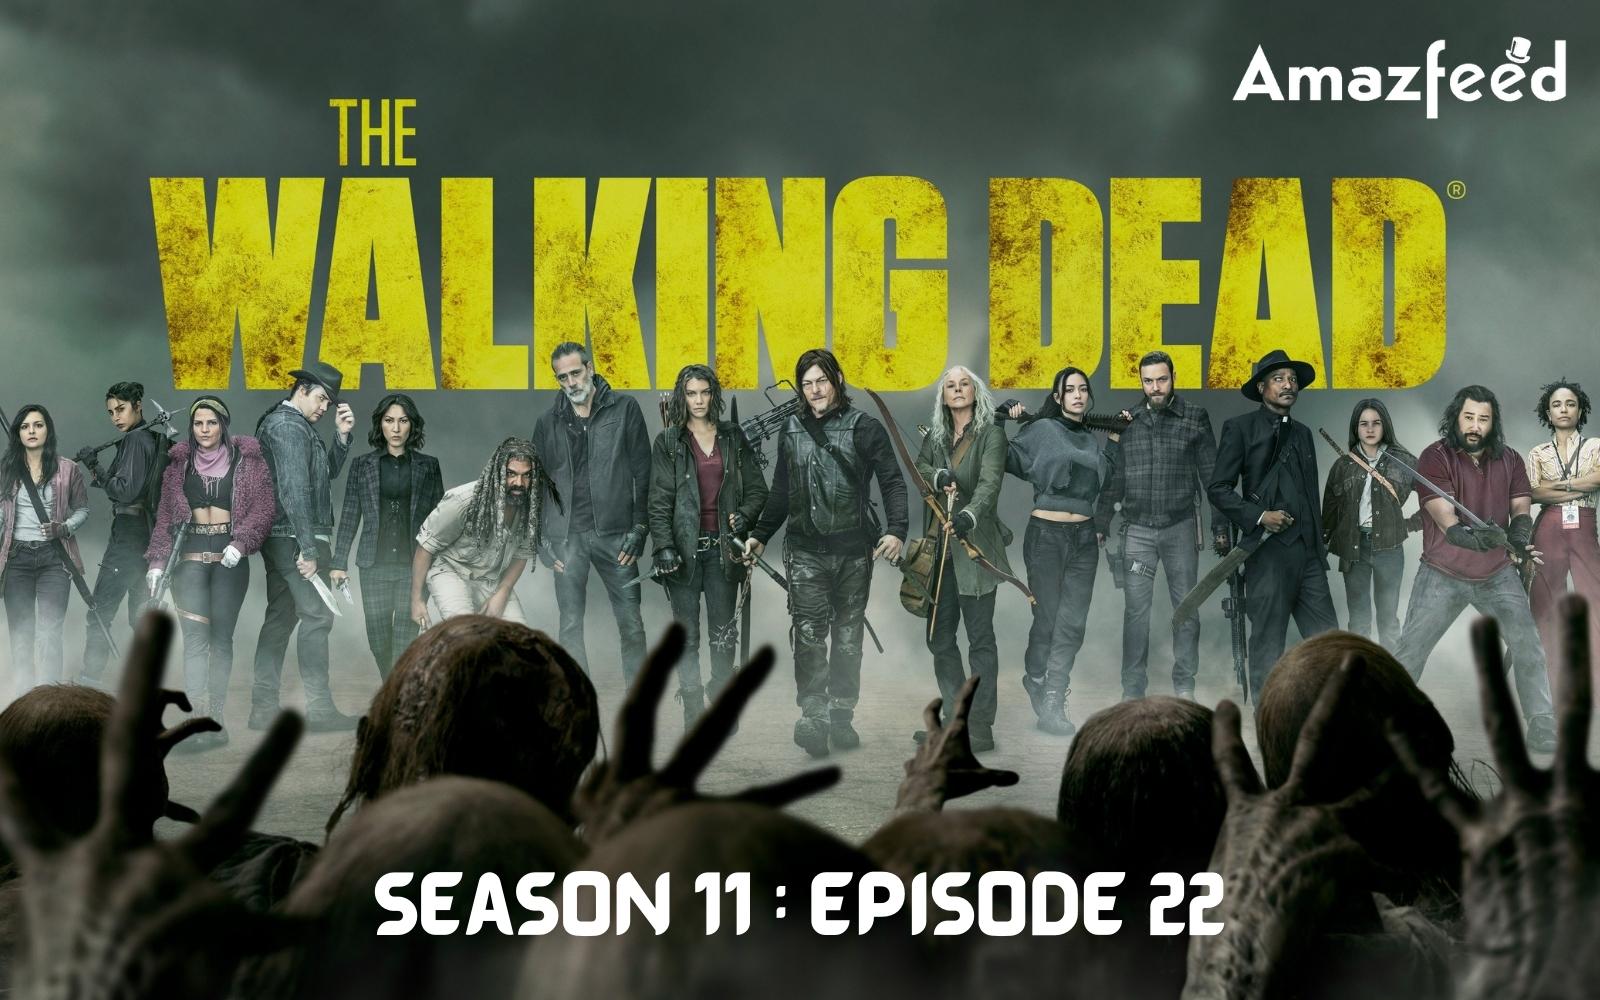 The Walking Dead Season 11 Episode 22 'Faith' : Preview, Where to Watch, Speculation, Countdown & Trailer